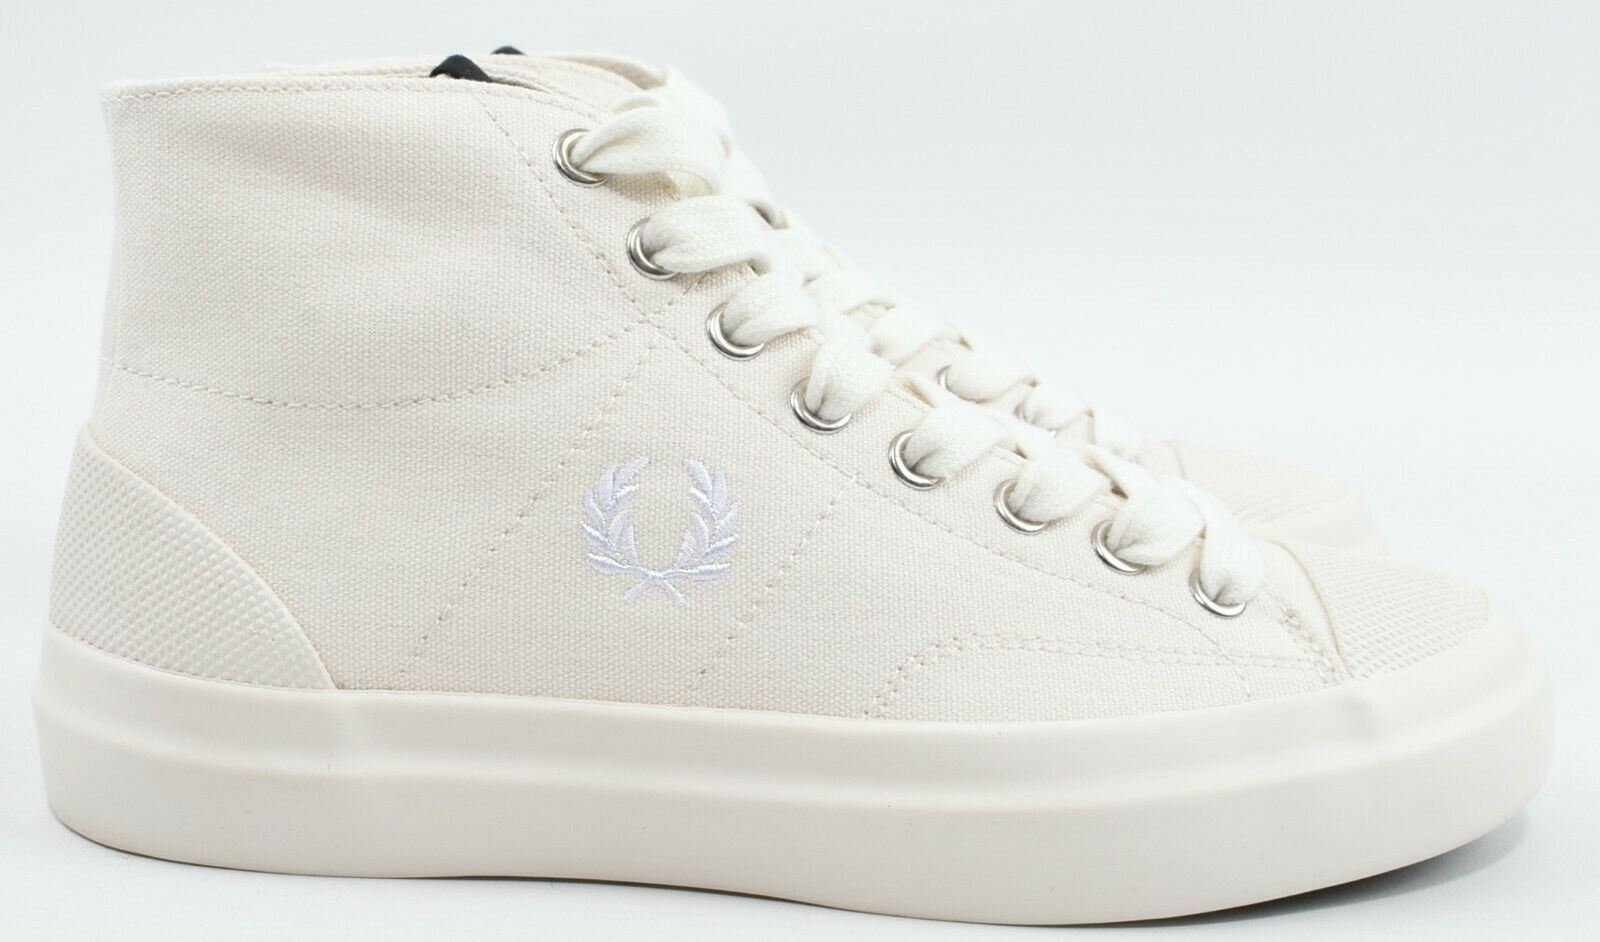 FRED PERRY Women's Off-White Mid Top Canvas Sneakers Trainers, UK 4